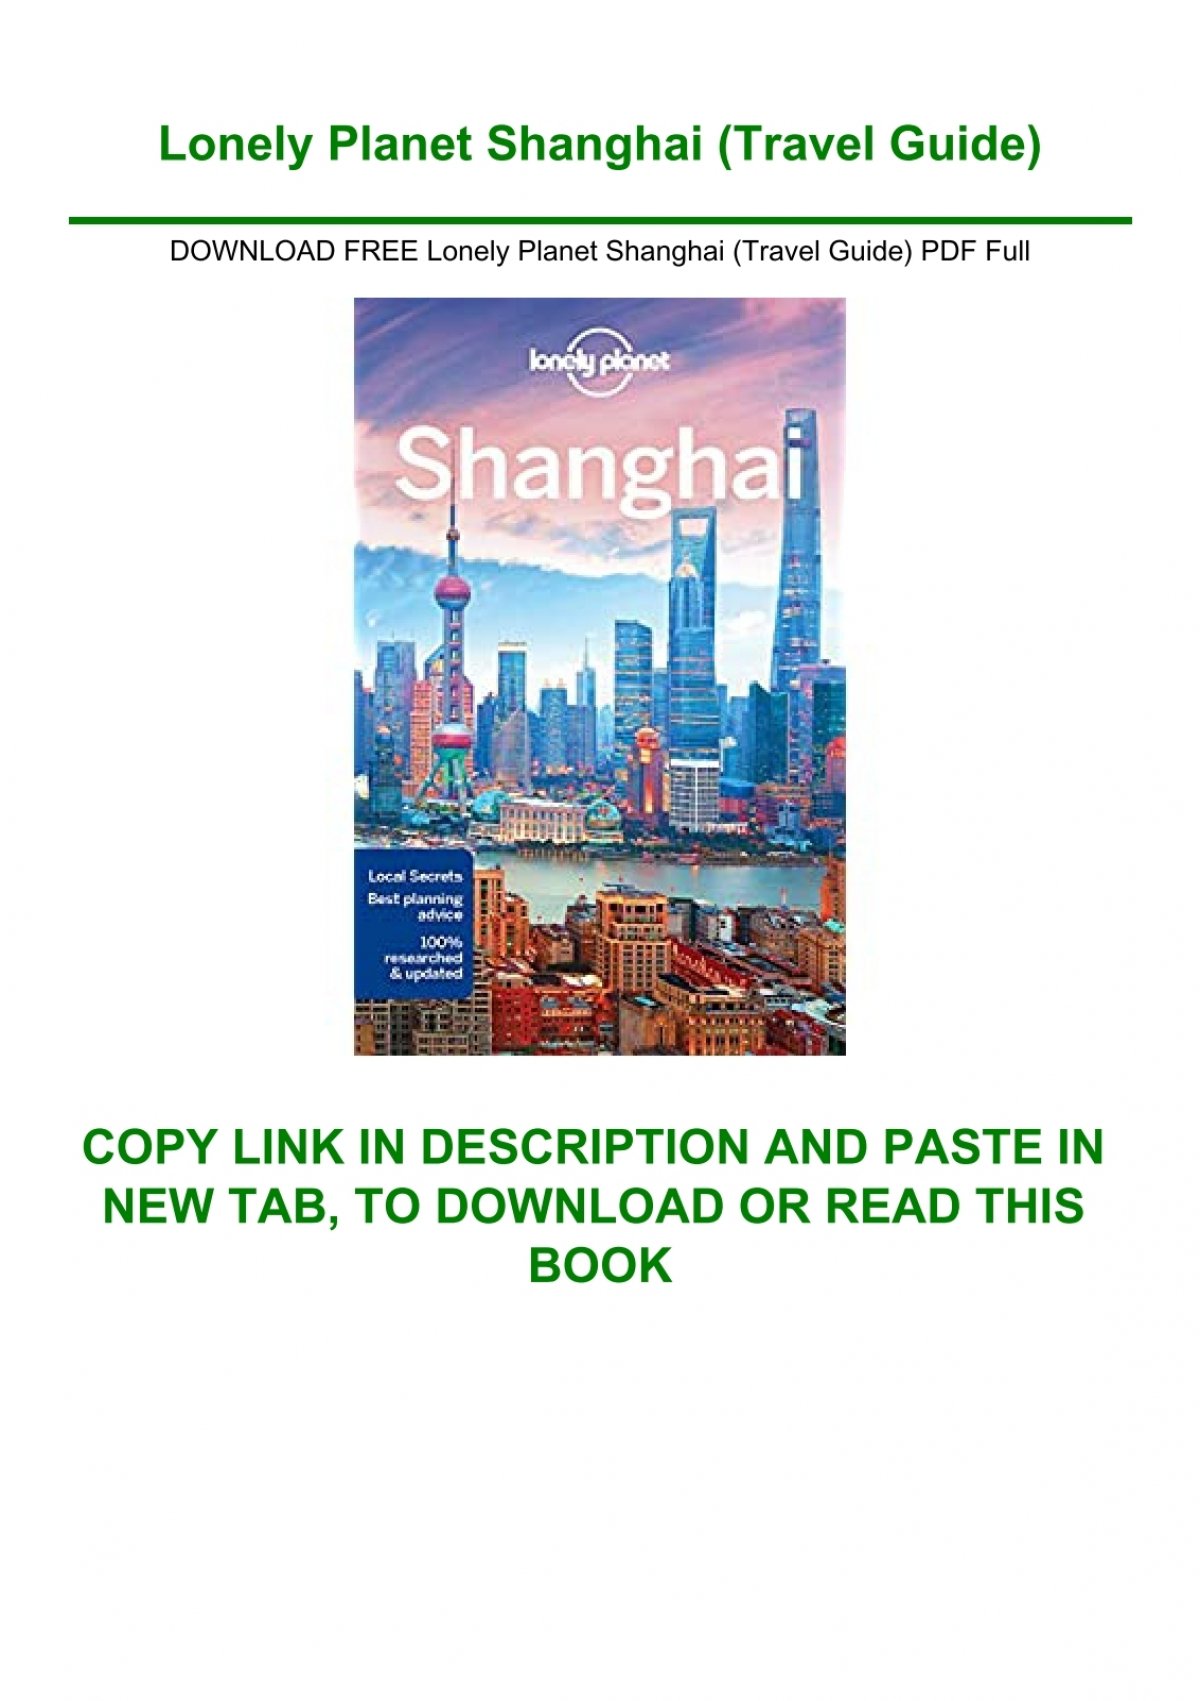 Download Free Lonely Planet Shanghai Travel Guide Pdf Full